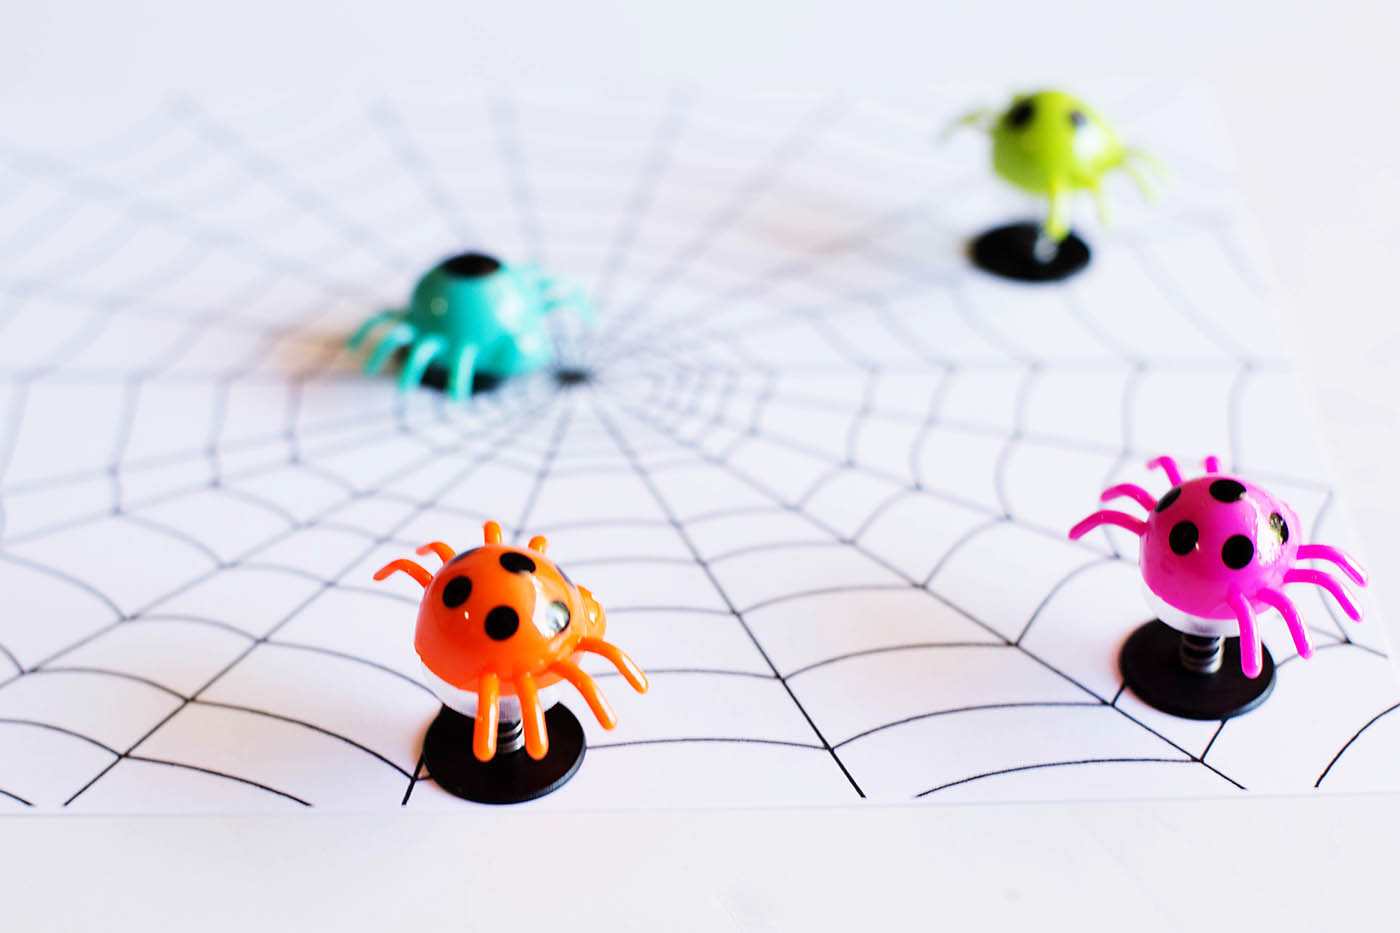 free printable spider games - fun for a Halloween party or just to play a fun game on a rainy day